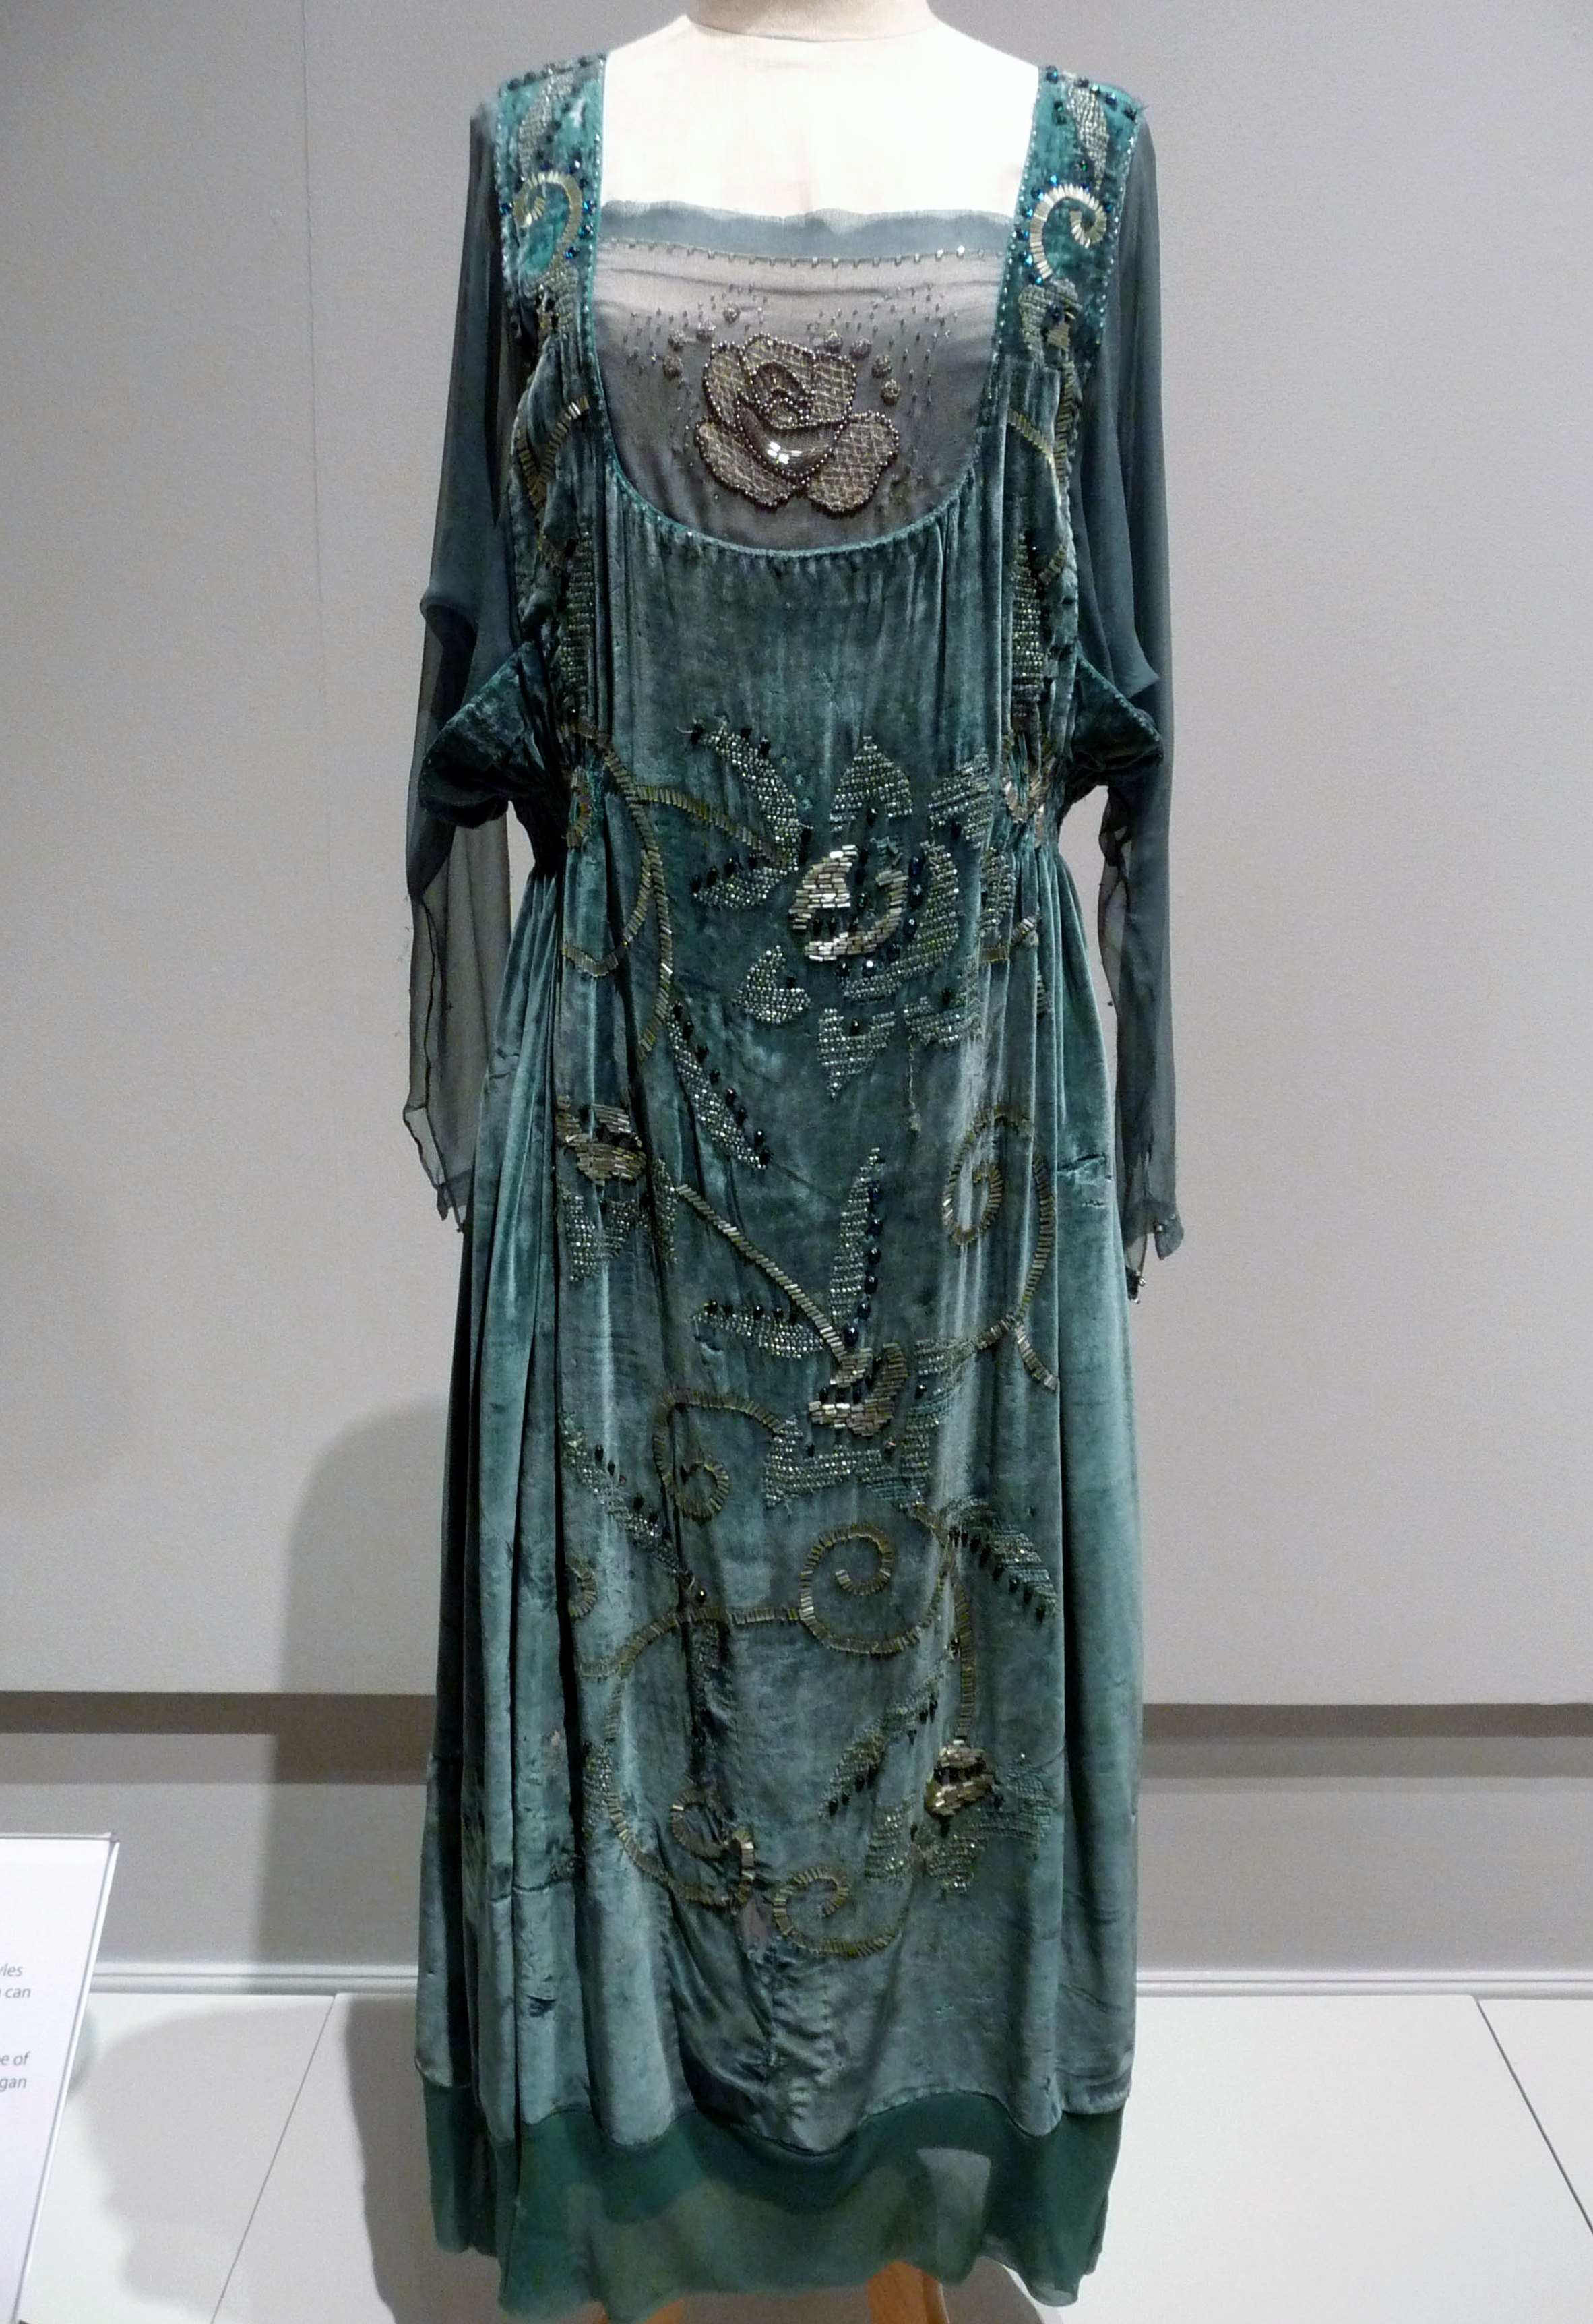 EVENING DRESS, silk with velvet and chiffon sleeves, aquired by Cosprop, made in early 1920's. Worn by Zoe Boyle as Lavinia Swire in Downton Abbey.